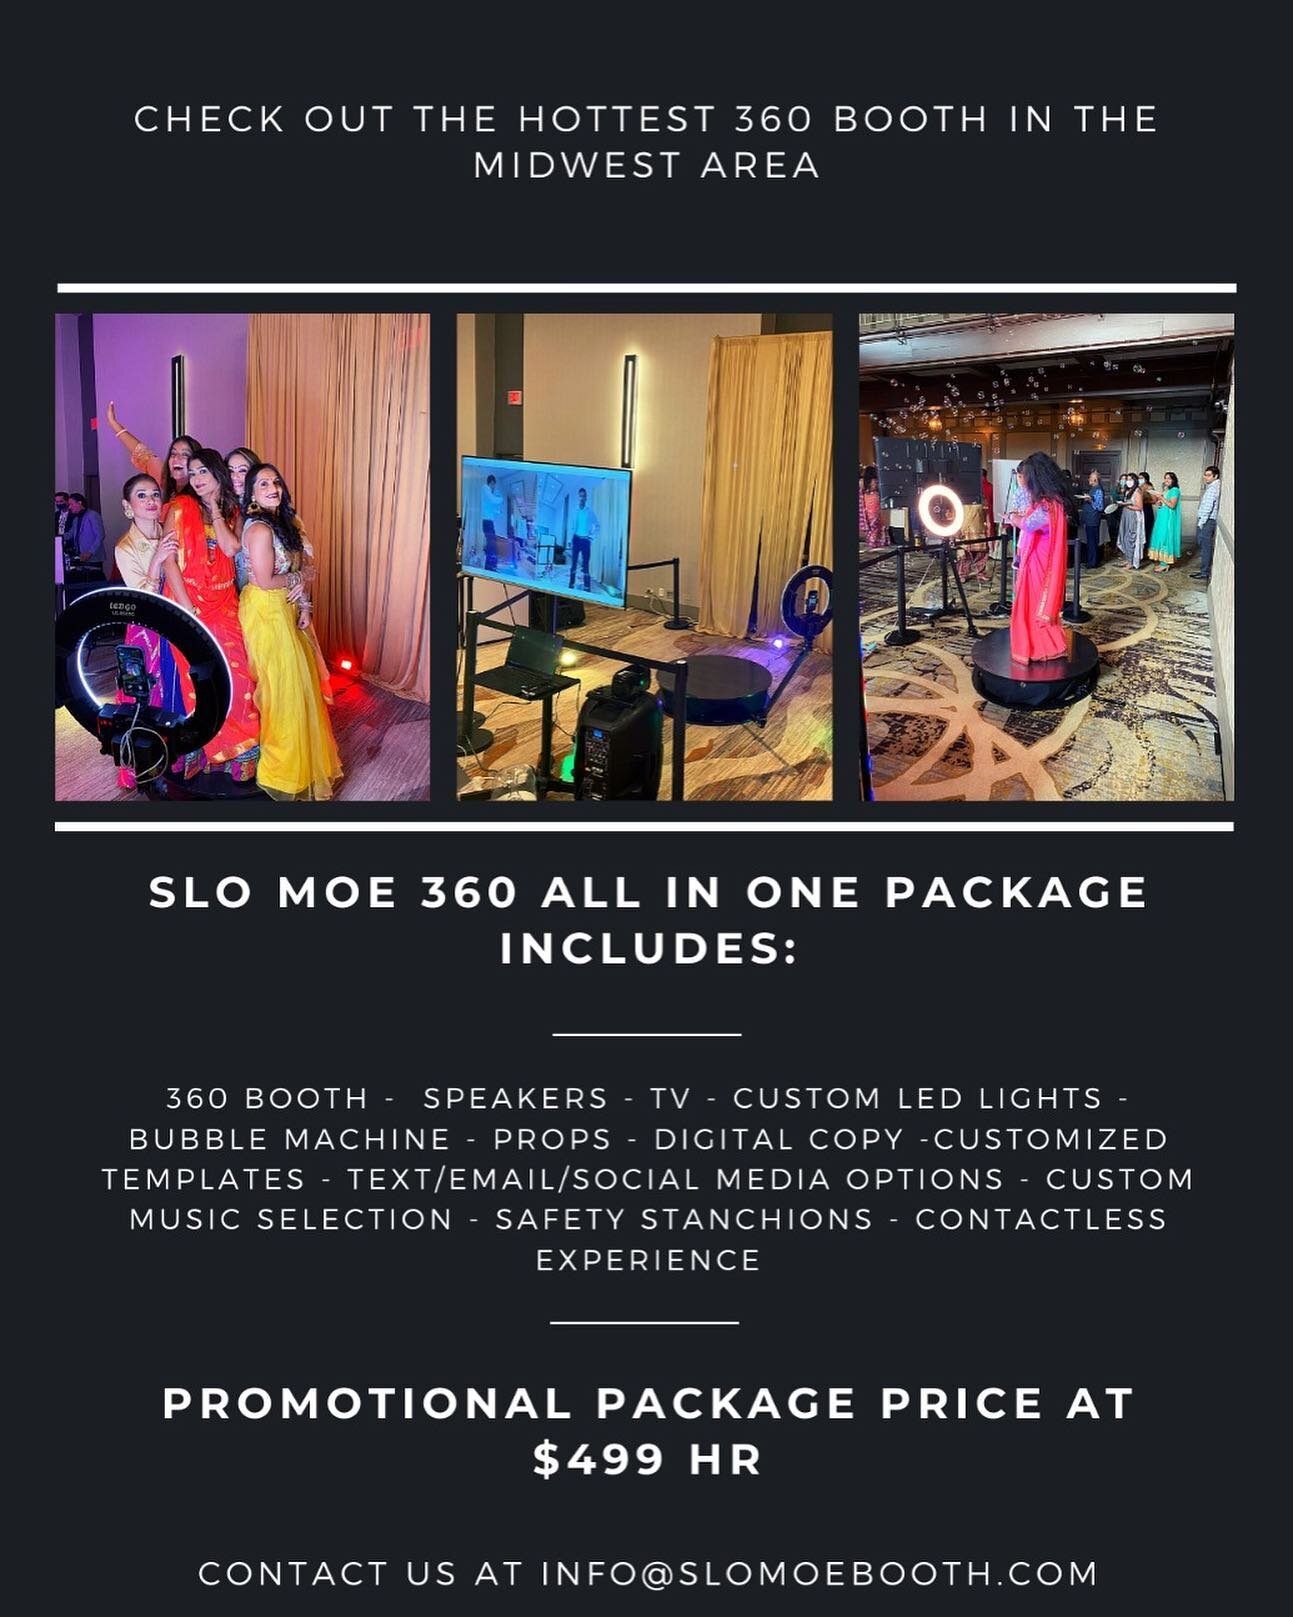 Check out the hottest 360 booth in chicago. Book today!